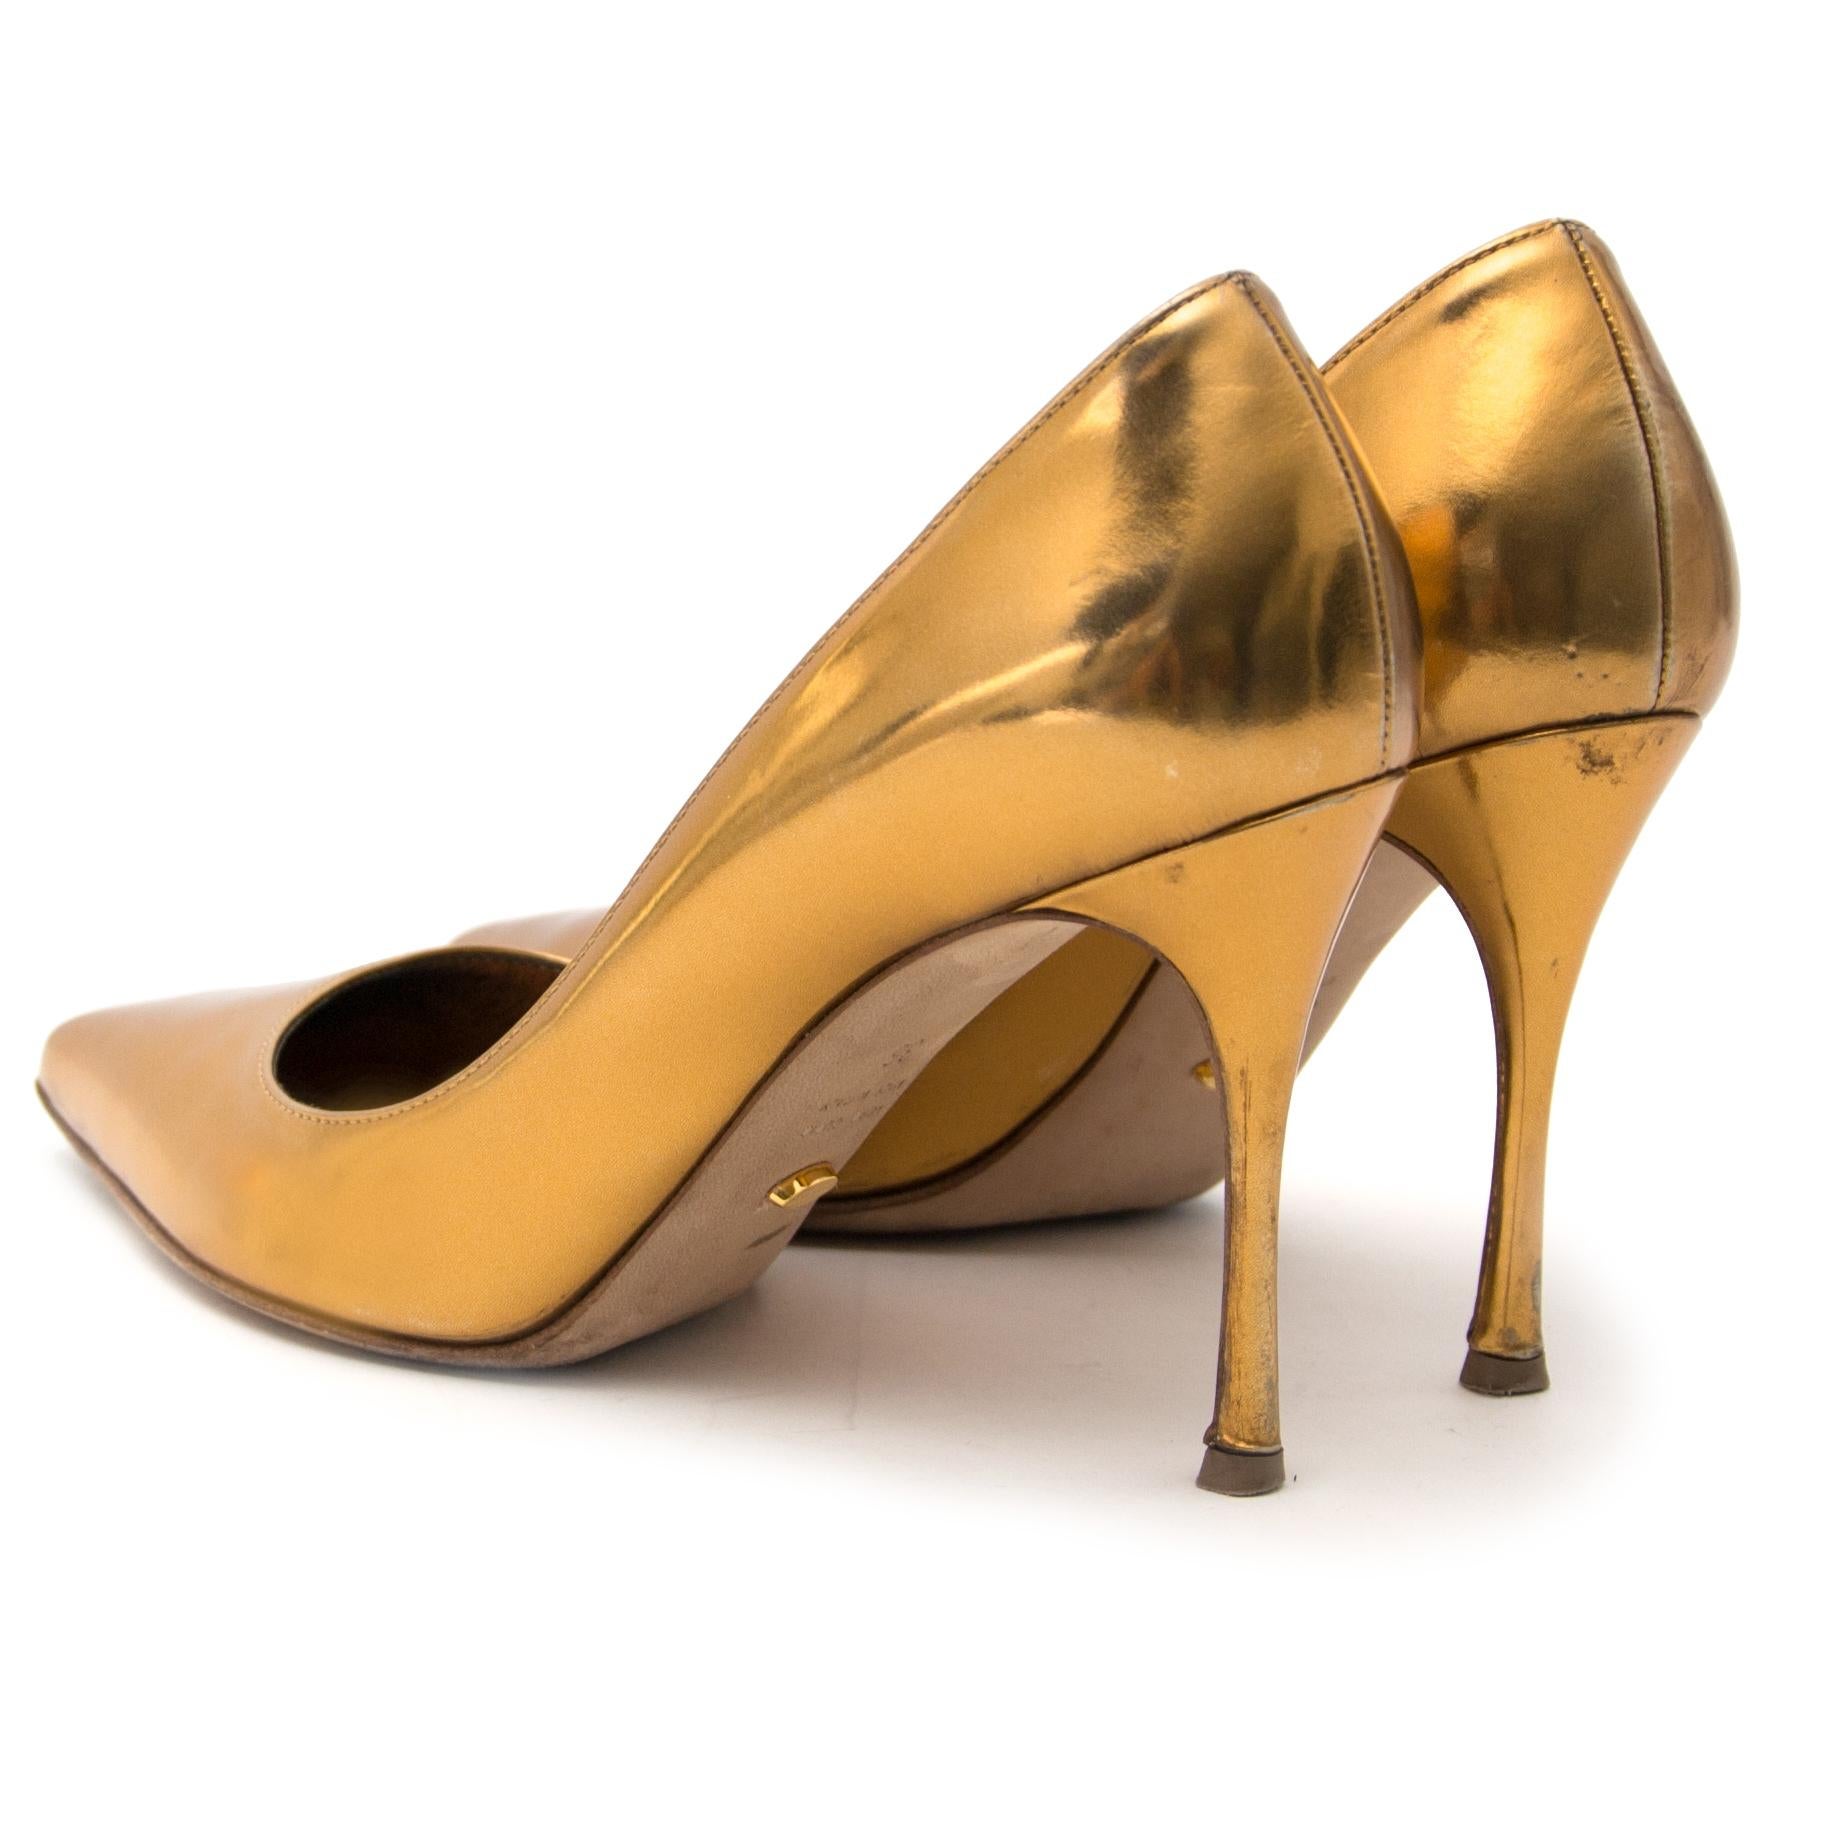 Good preloved condition!

Sergio Rossi Gold Metallic Pump - Size 36

This gold-tone metallic pump by Sergio Rossi features a mid-high heel and a pointed toe.
It's the perfect piece to make you shine all night long!
